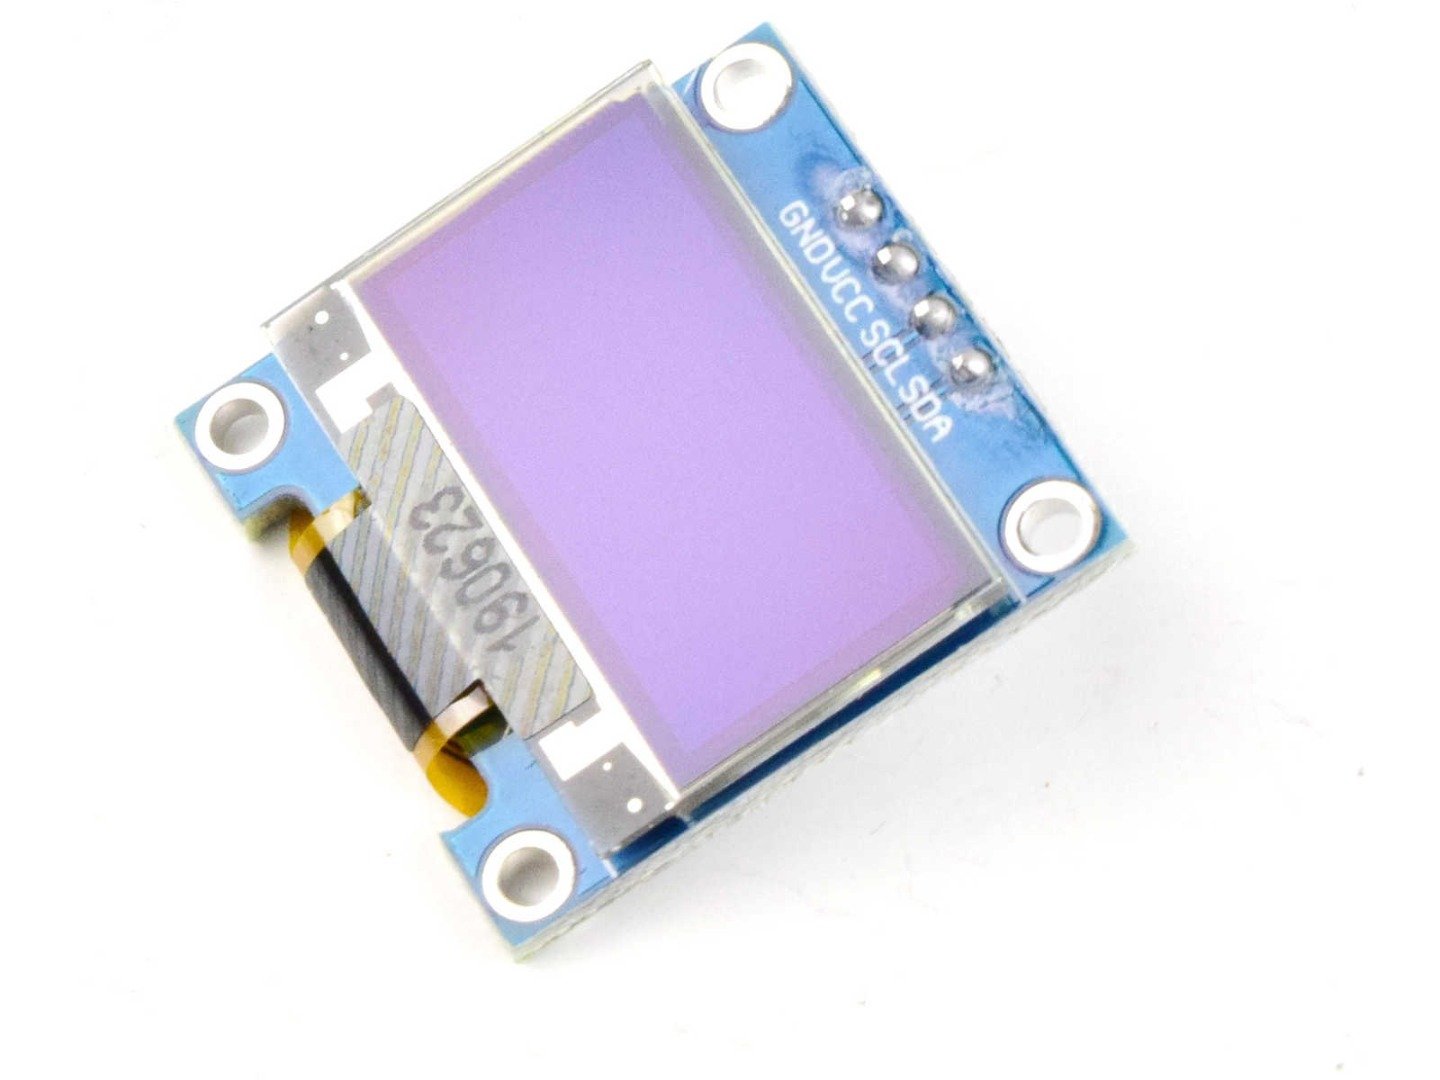 OLED 128×64 Pixel, I2C, 0.96 inch, SSD1306 SH1106, 3-5V (100% compatible with Arduino) 9